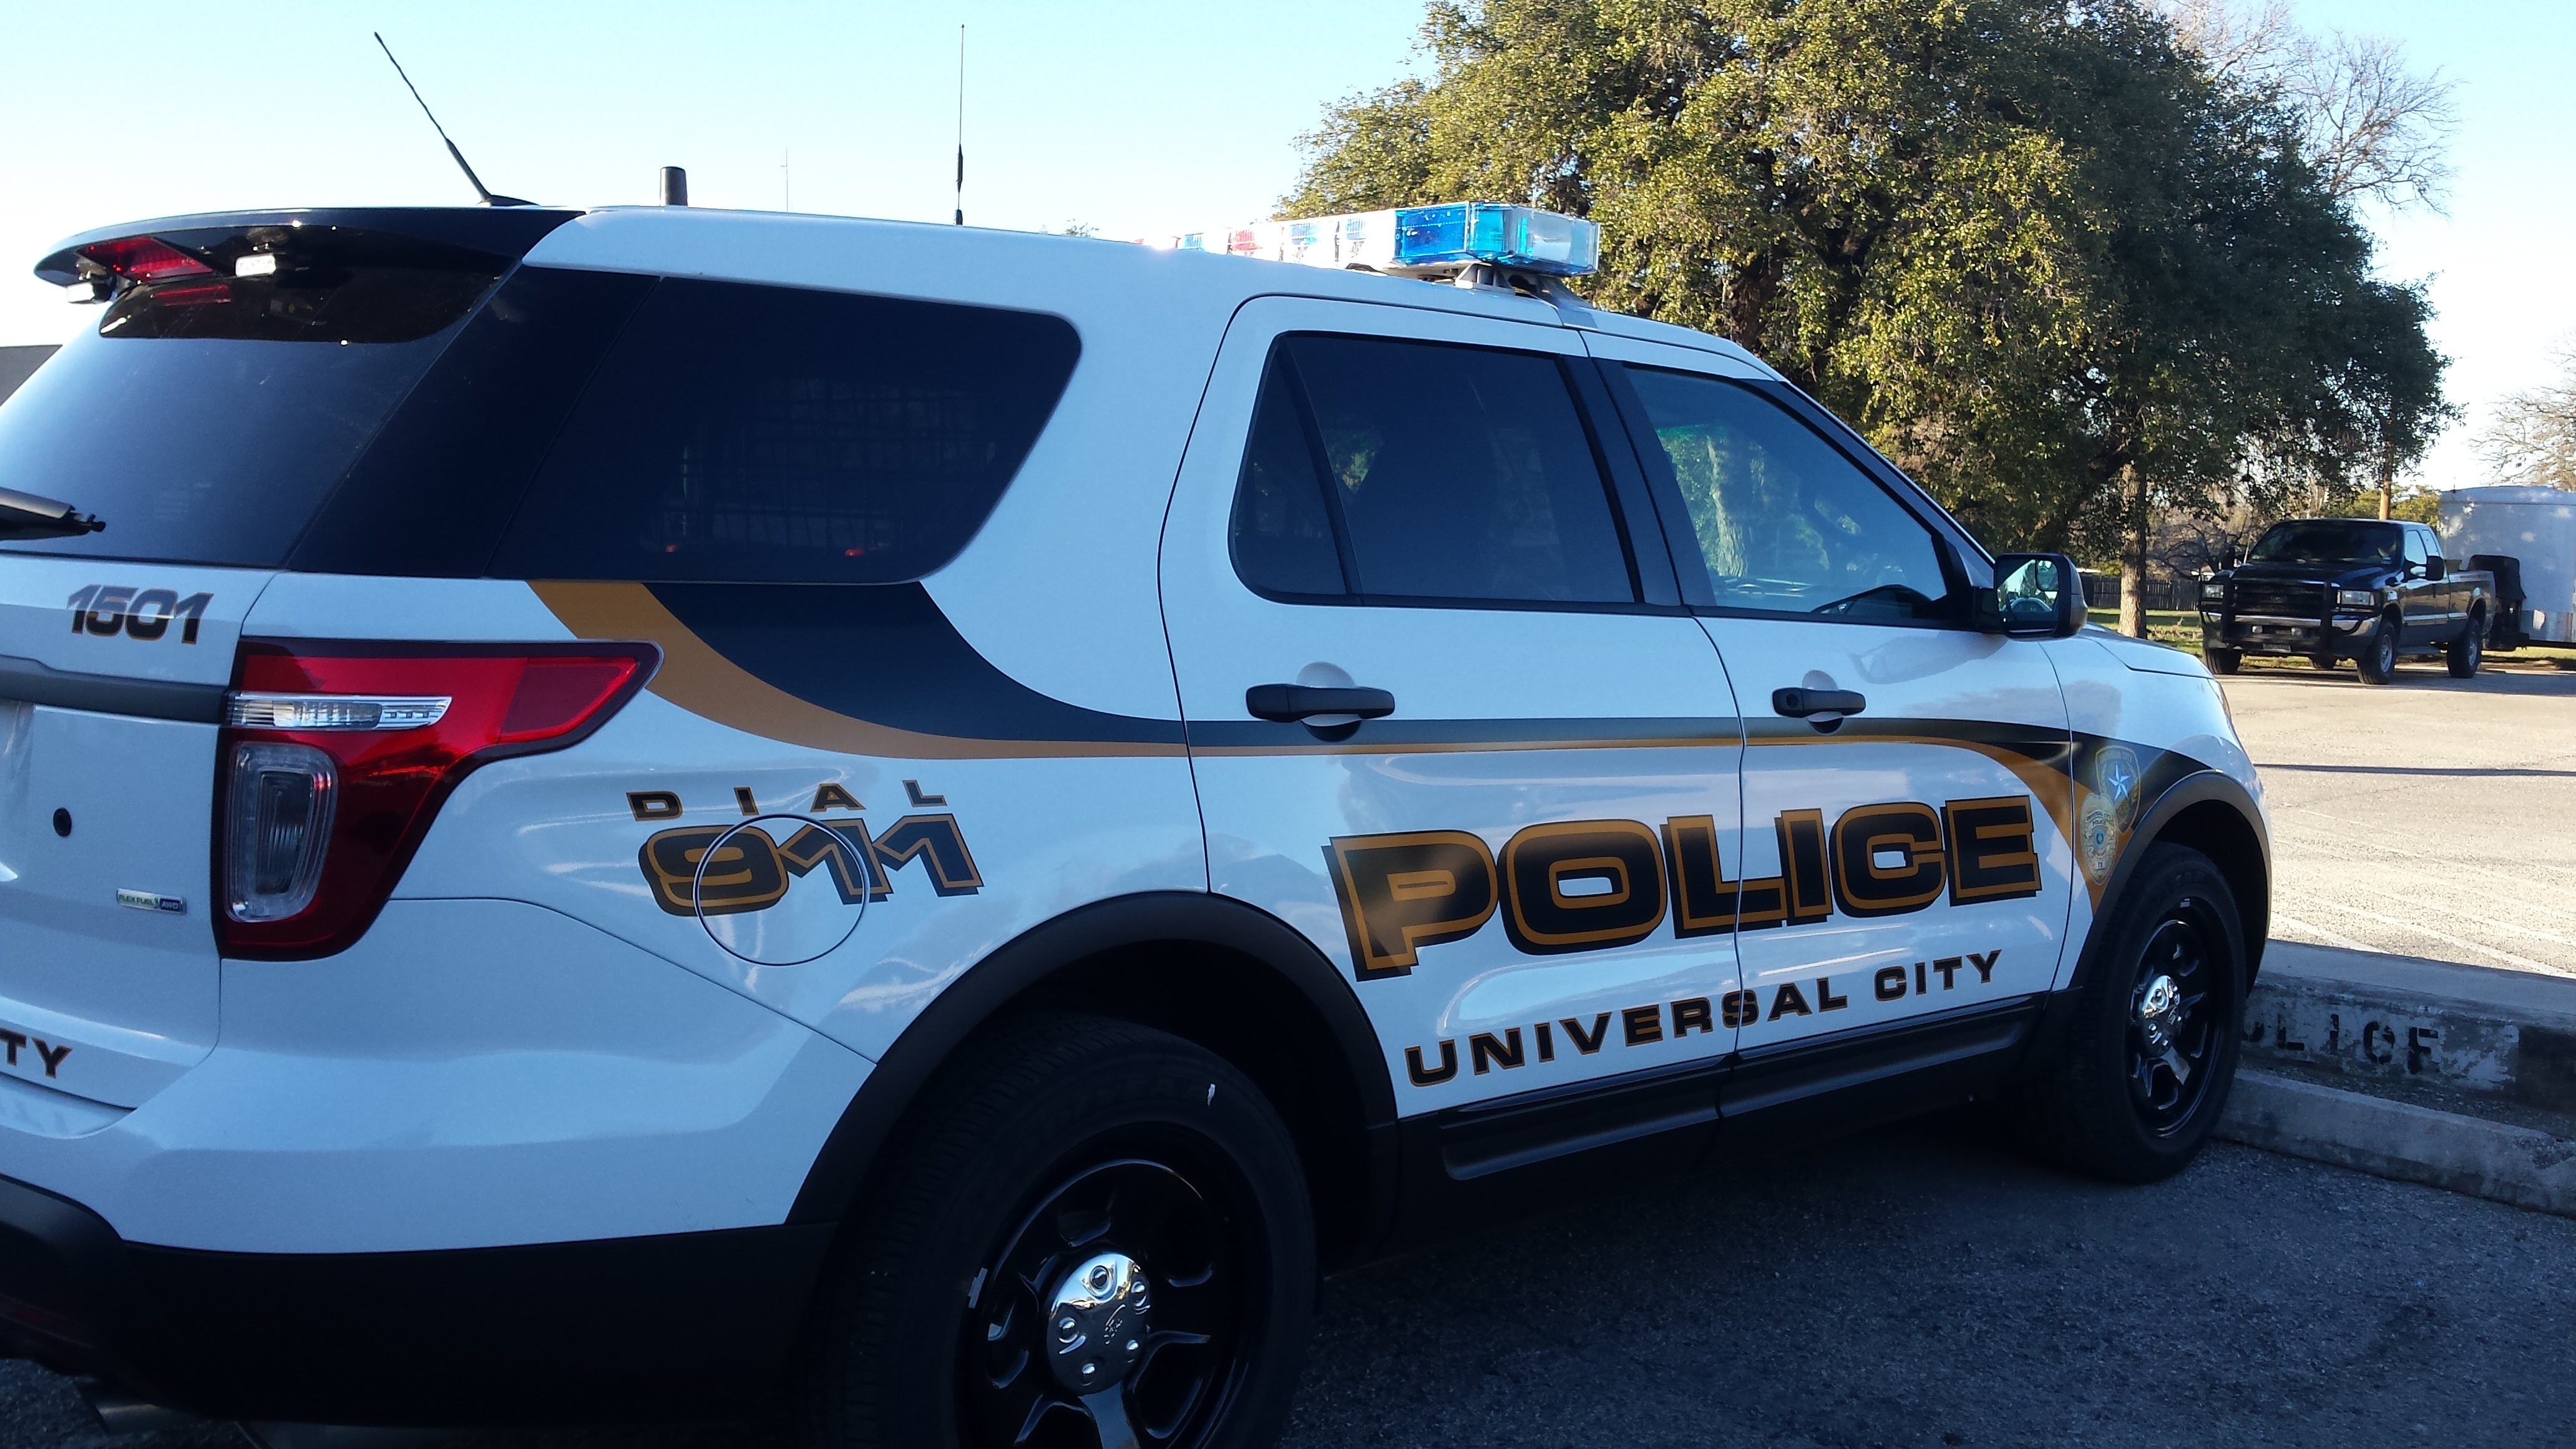 Police Department | Universal City, TX - Official Website